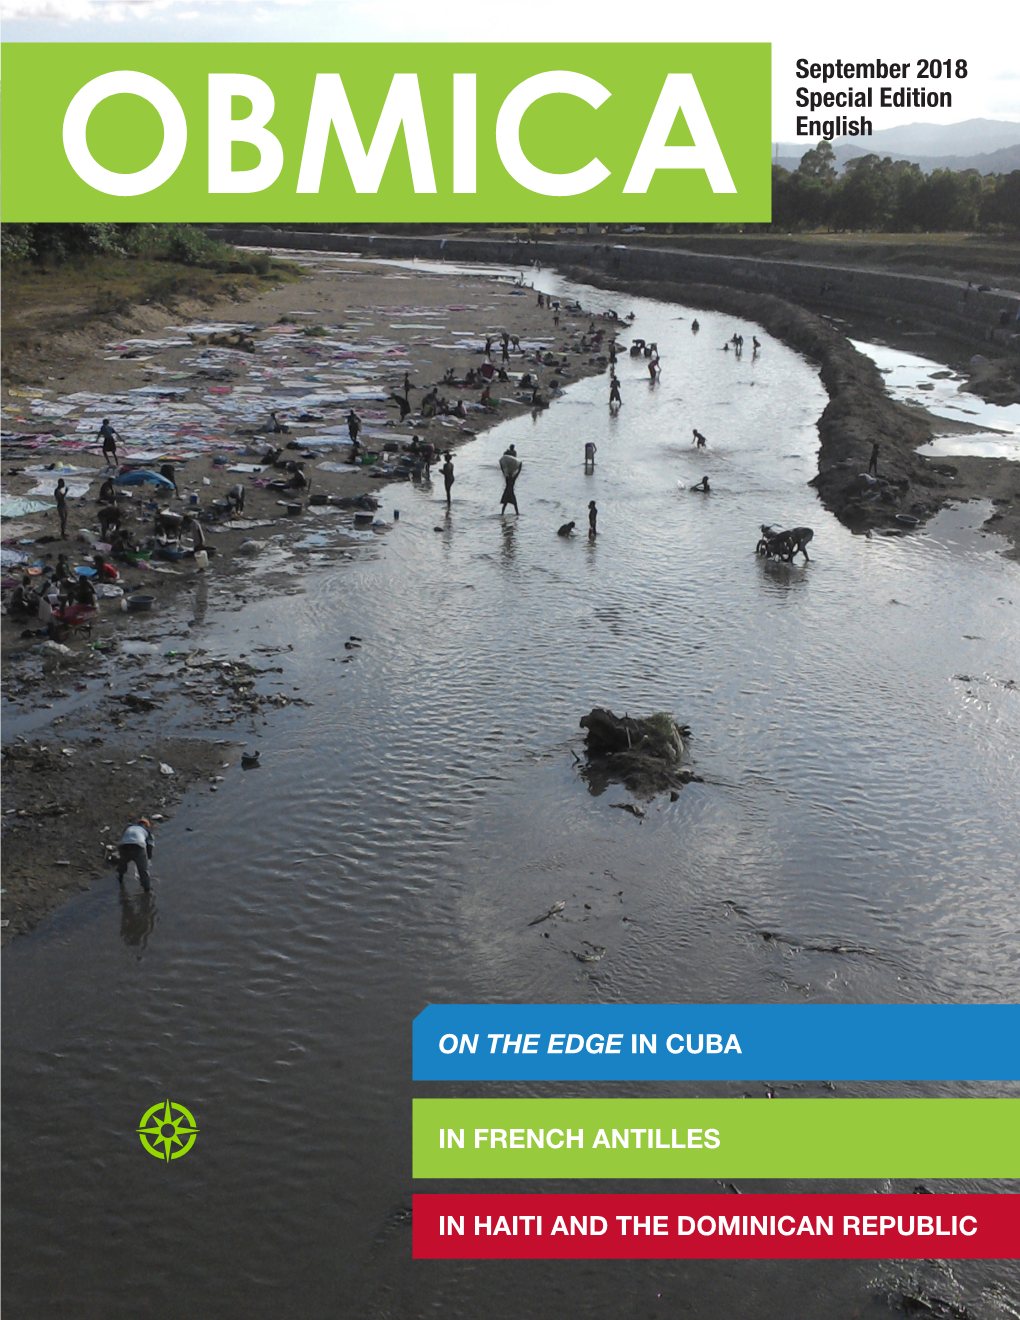 OBMICA September 2018 Special Edition English on the EDGE IN